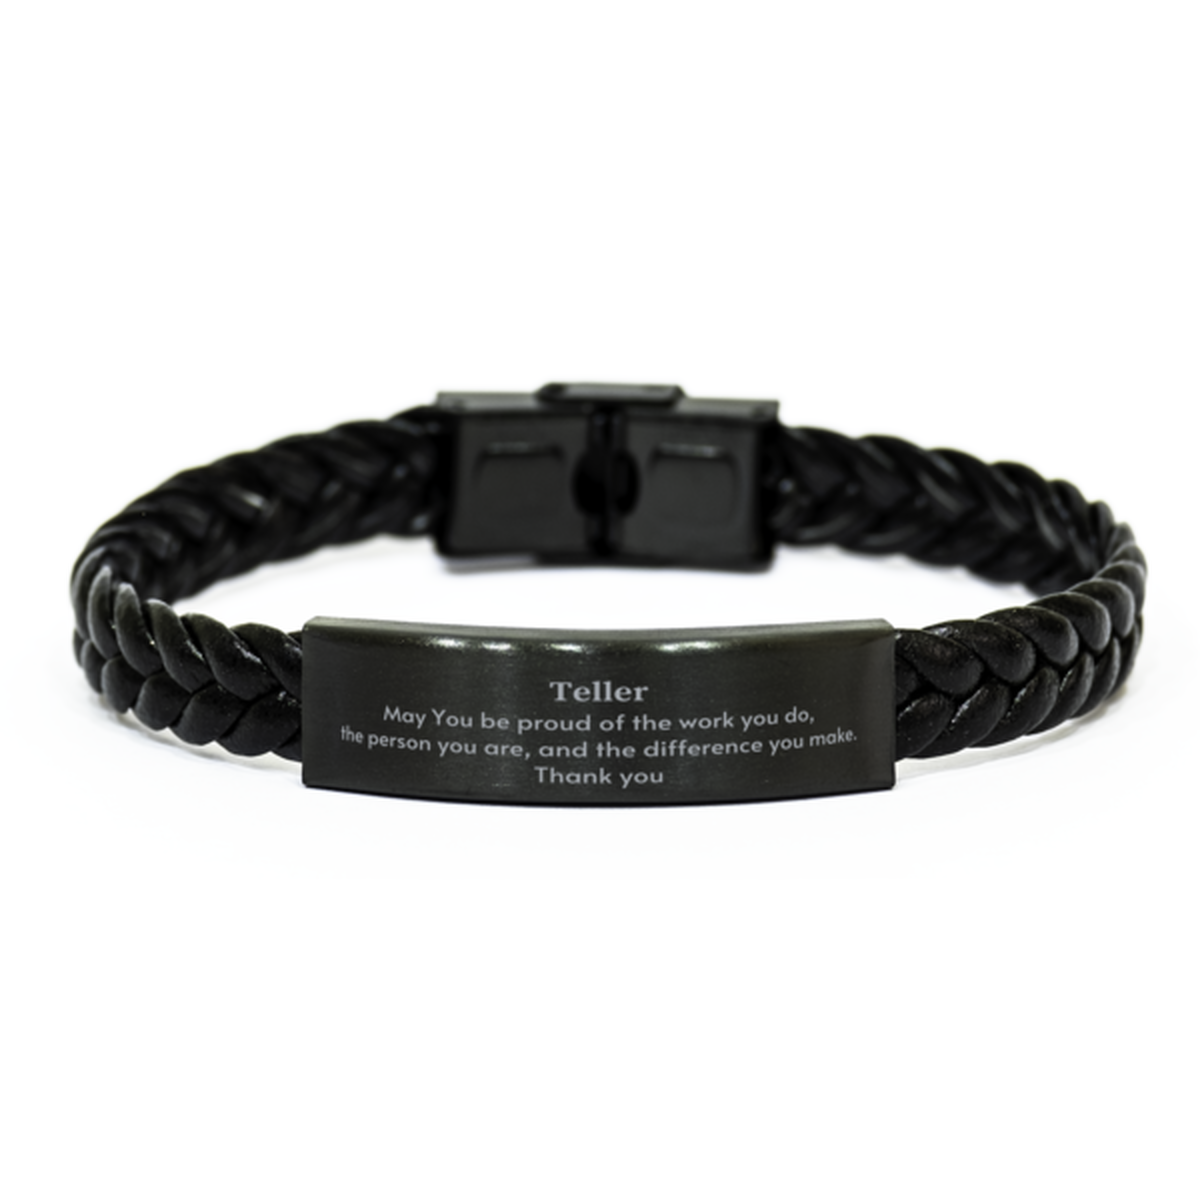 Heartwarming Braided Leather Bracelet Retirement Coworkers Gifts for Teller, Teller May You be proud of the work you do, the person you are Gifts for Boss Men Women Friends